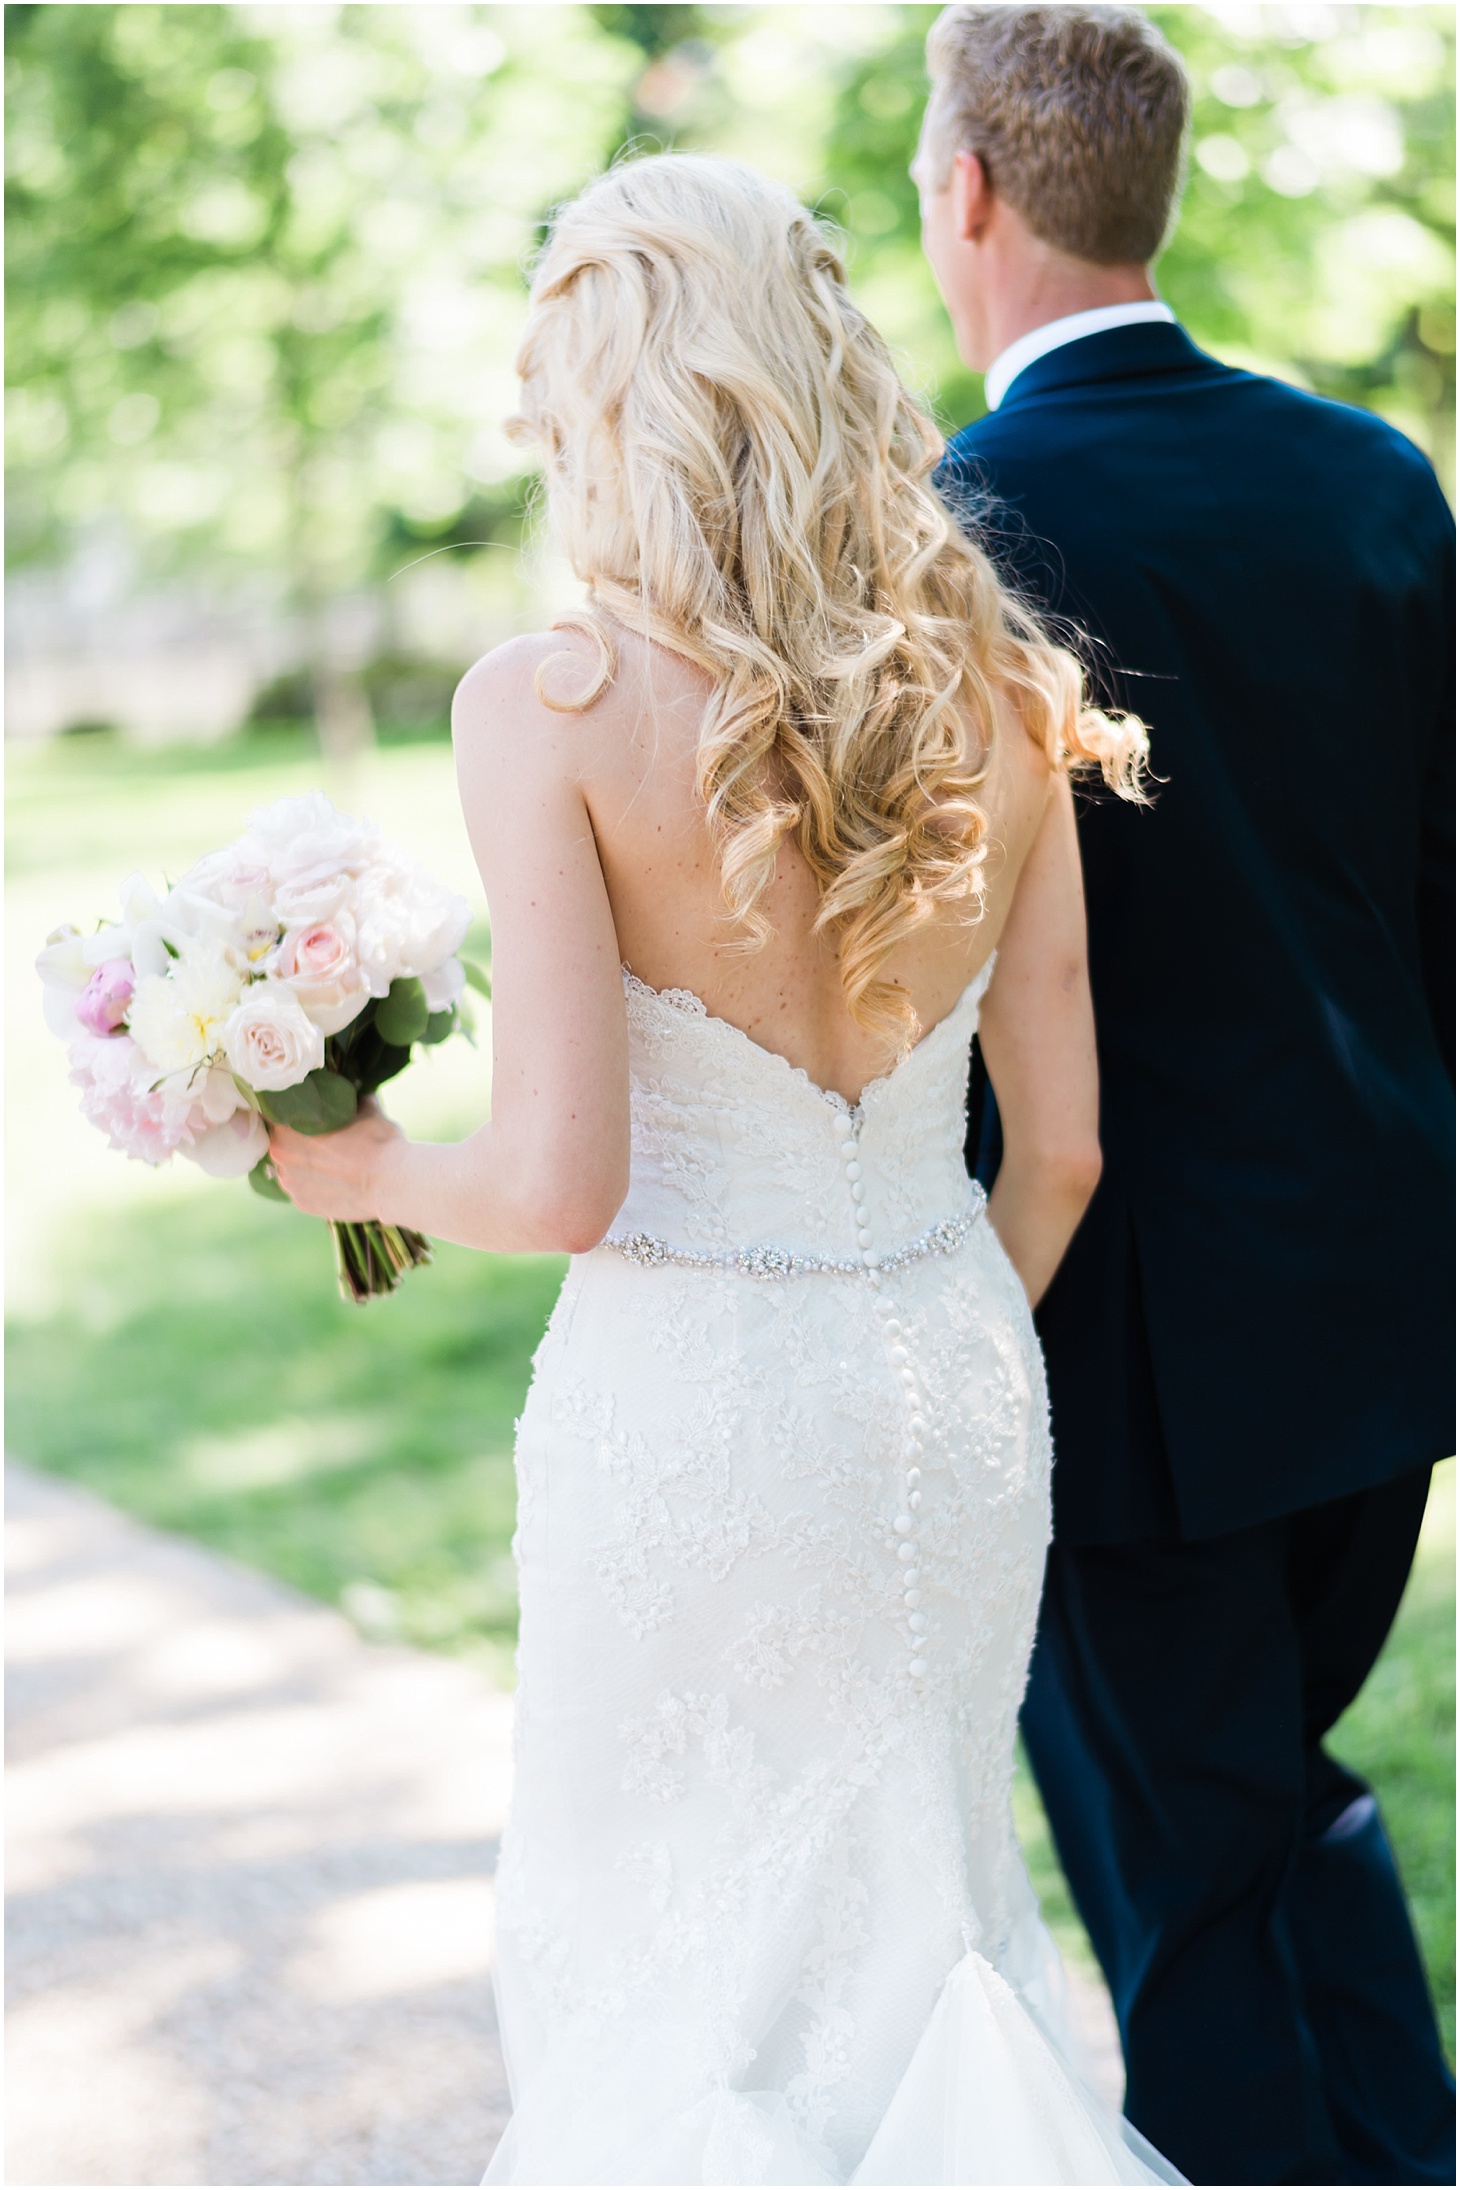 Navy and Blush Summer Wedding at the Army and Navy Club, Ceremony at Capitol Hill Baptist Church, Sarah Bradshaw Photography, DC Wedding Photographer